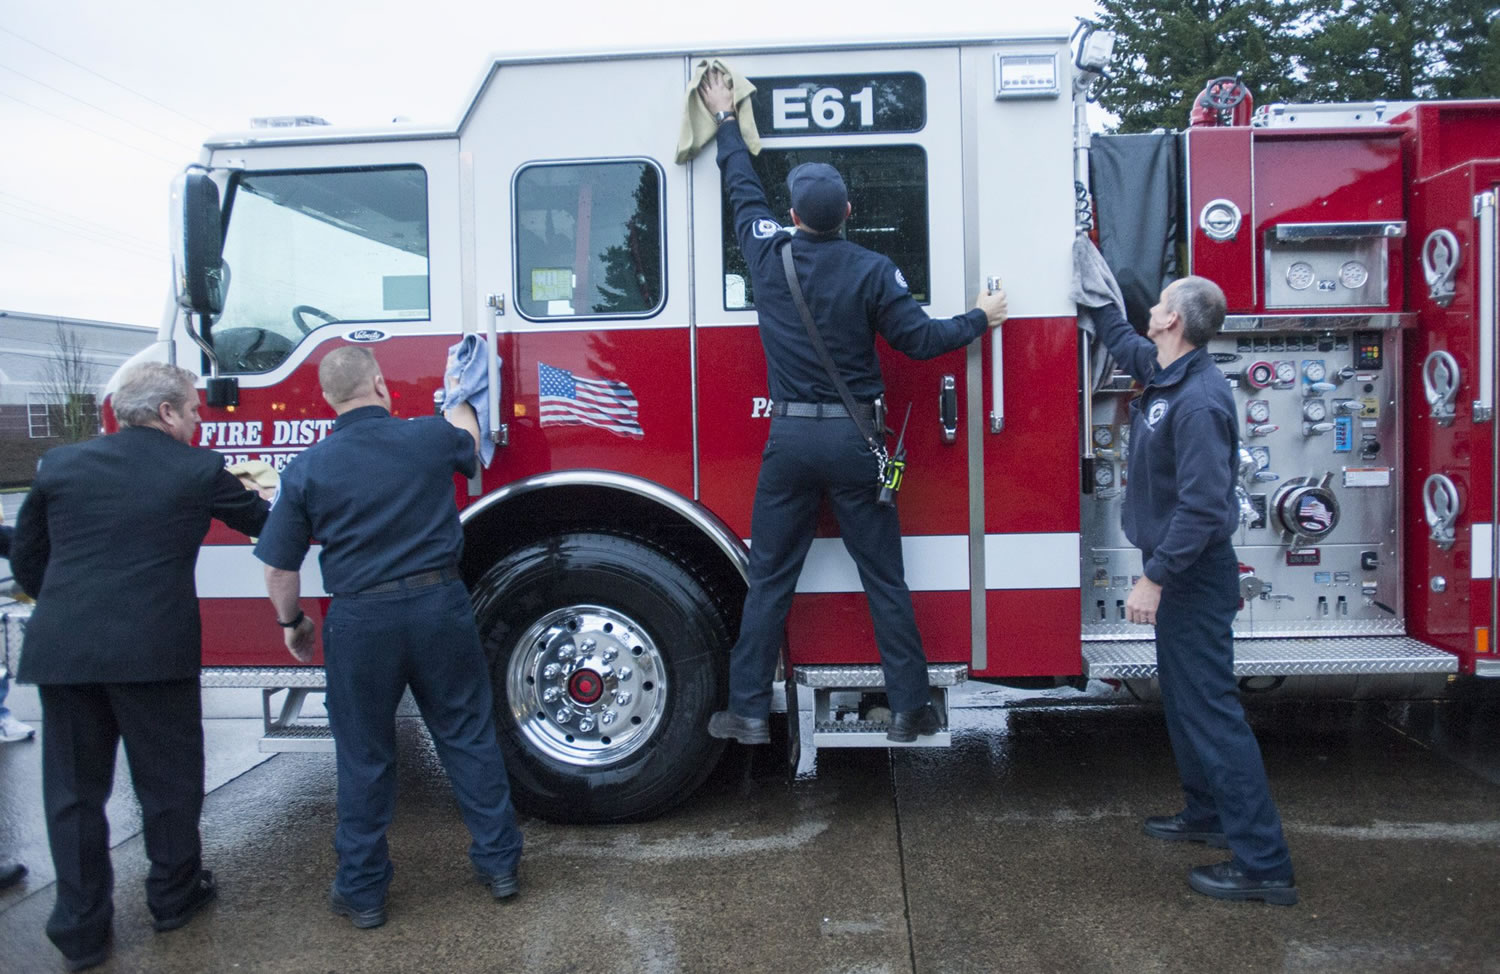 Firefighters at District 6 ritually wash a new fire engine in Hazel Dell on Thursday, just before placing it into service for the first time.